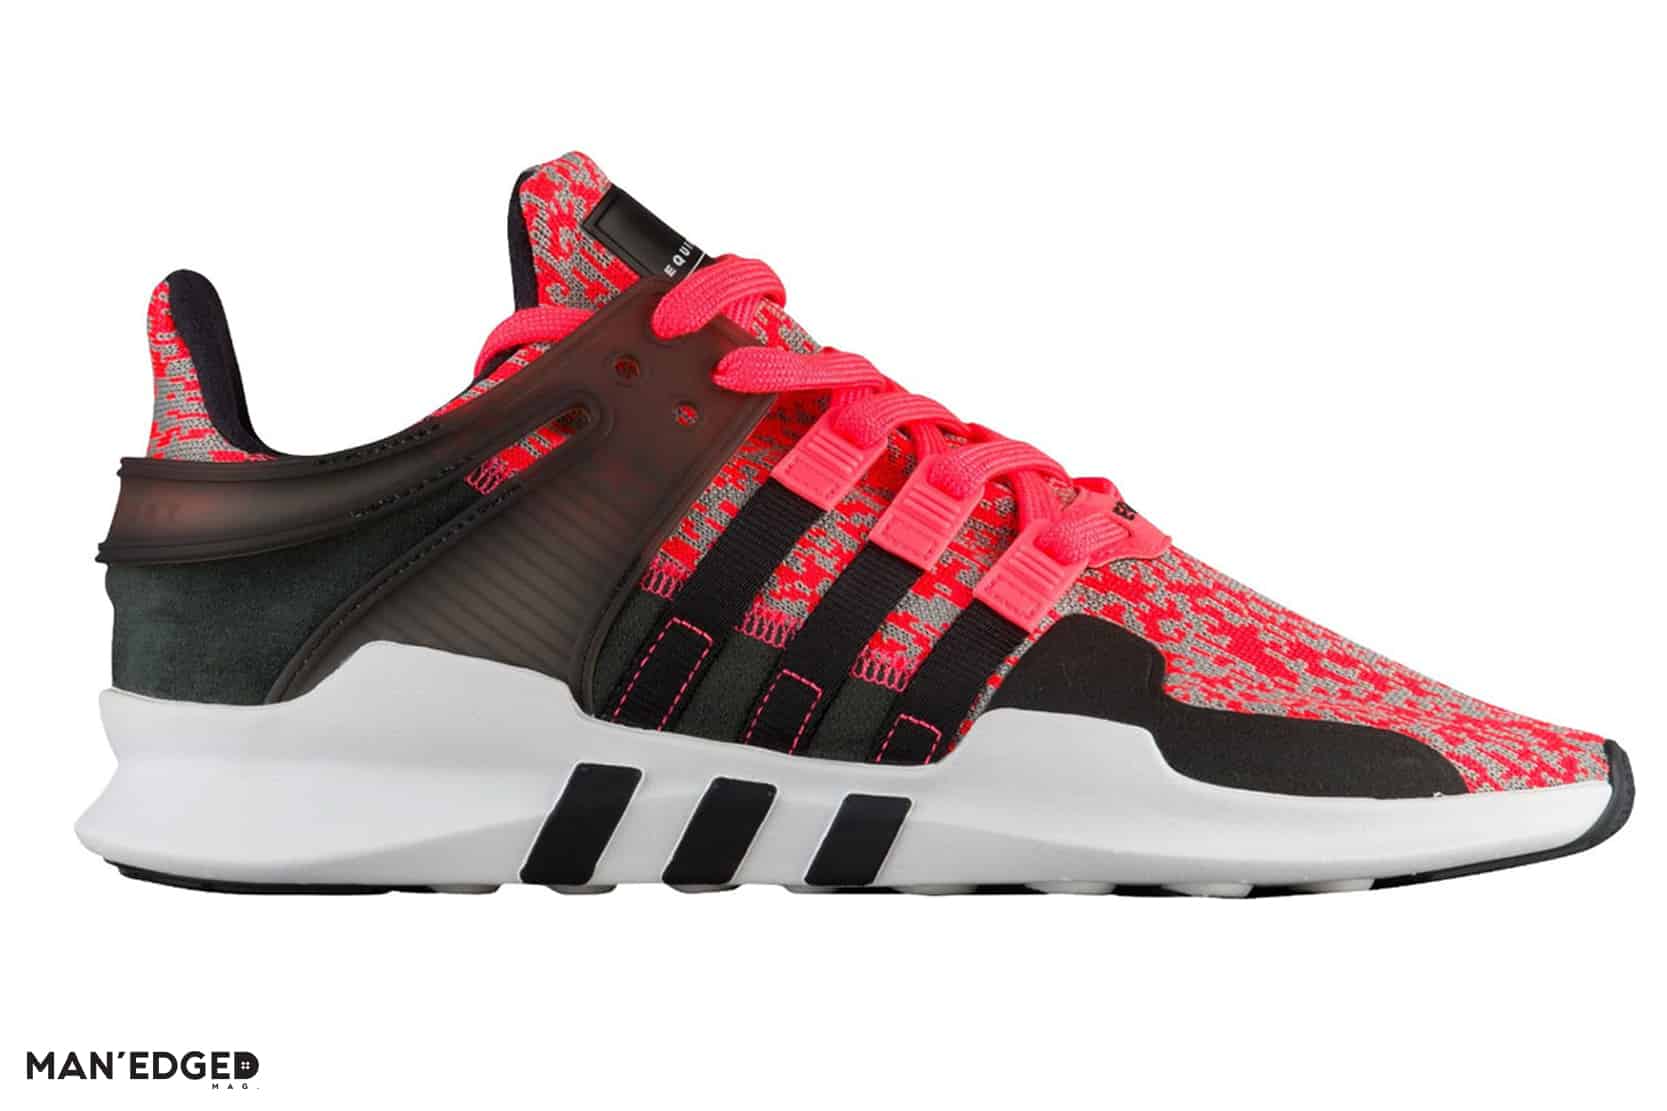 How to Gift to the Athleisure Obsessed Man featuring men's Adidas Originals EQT shoes